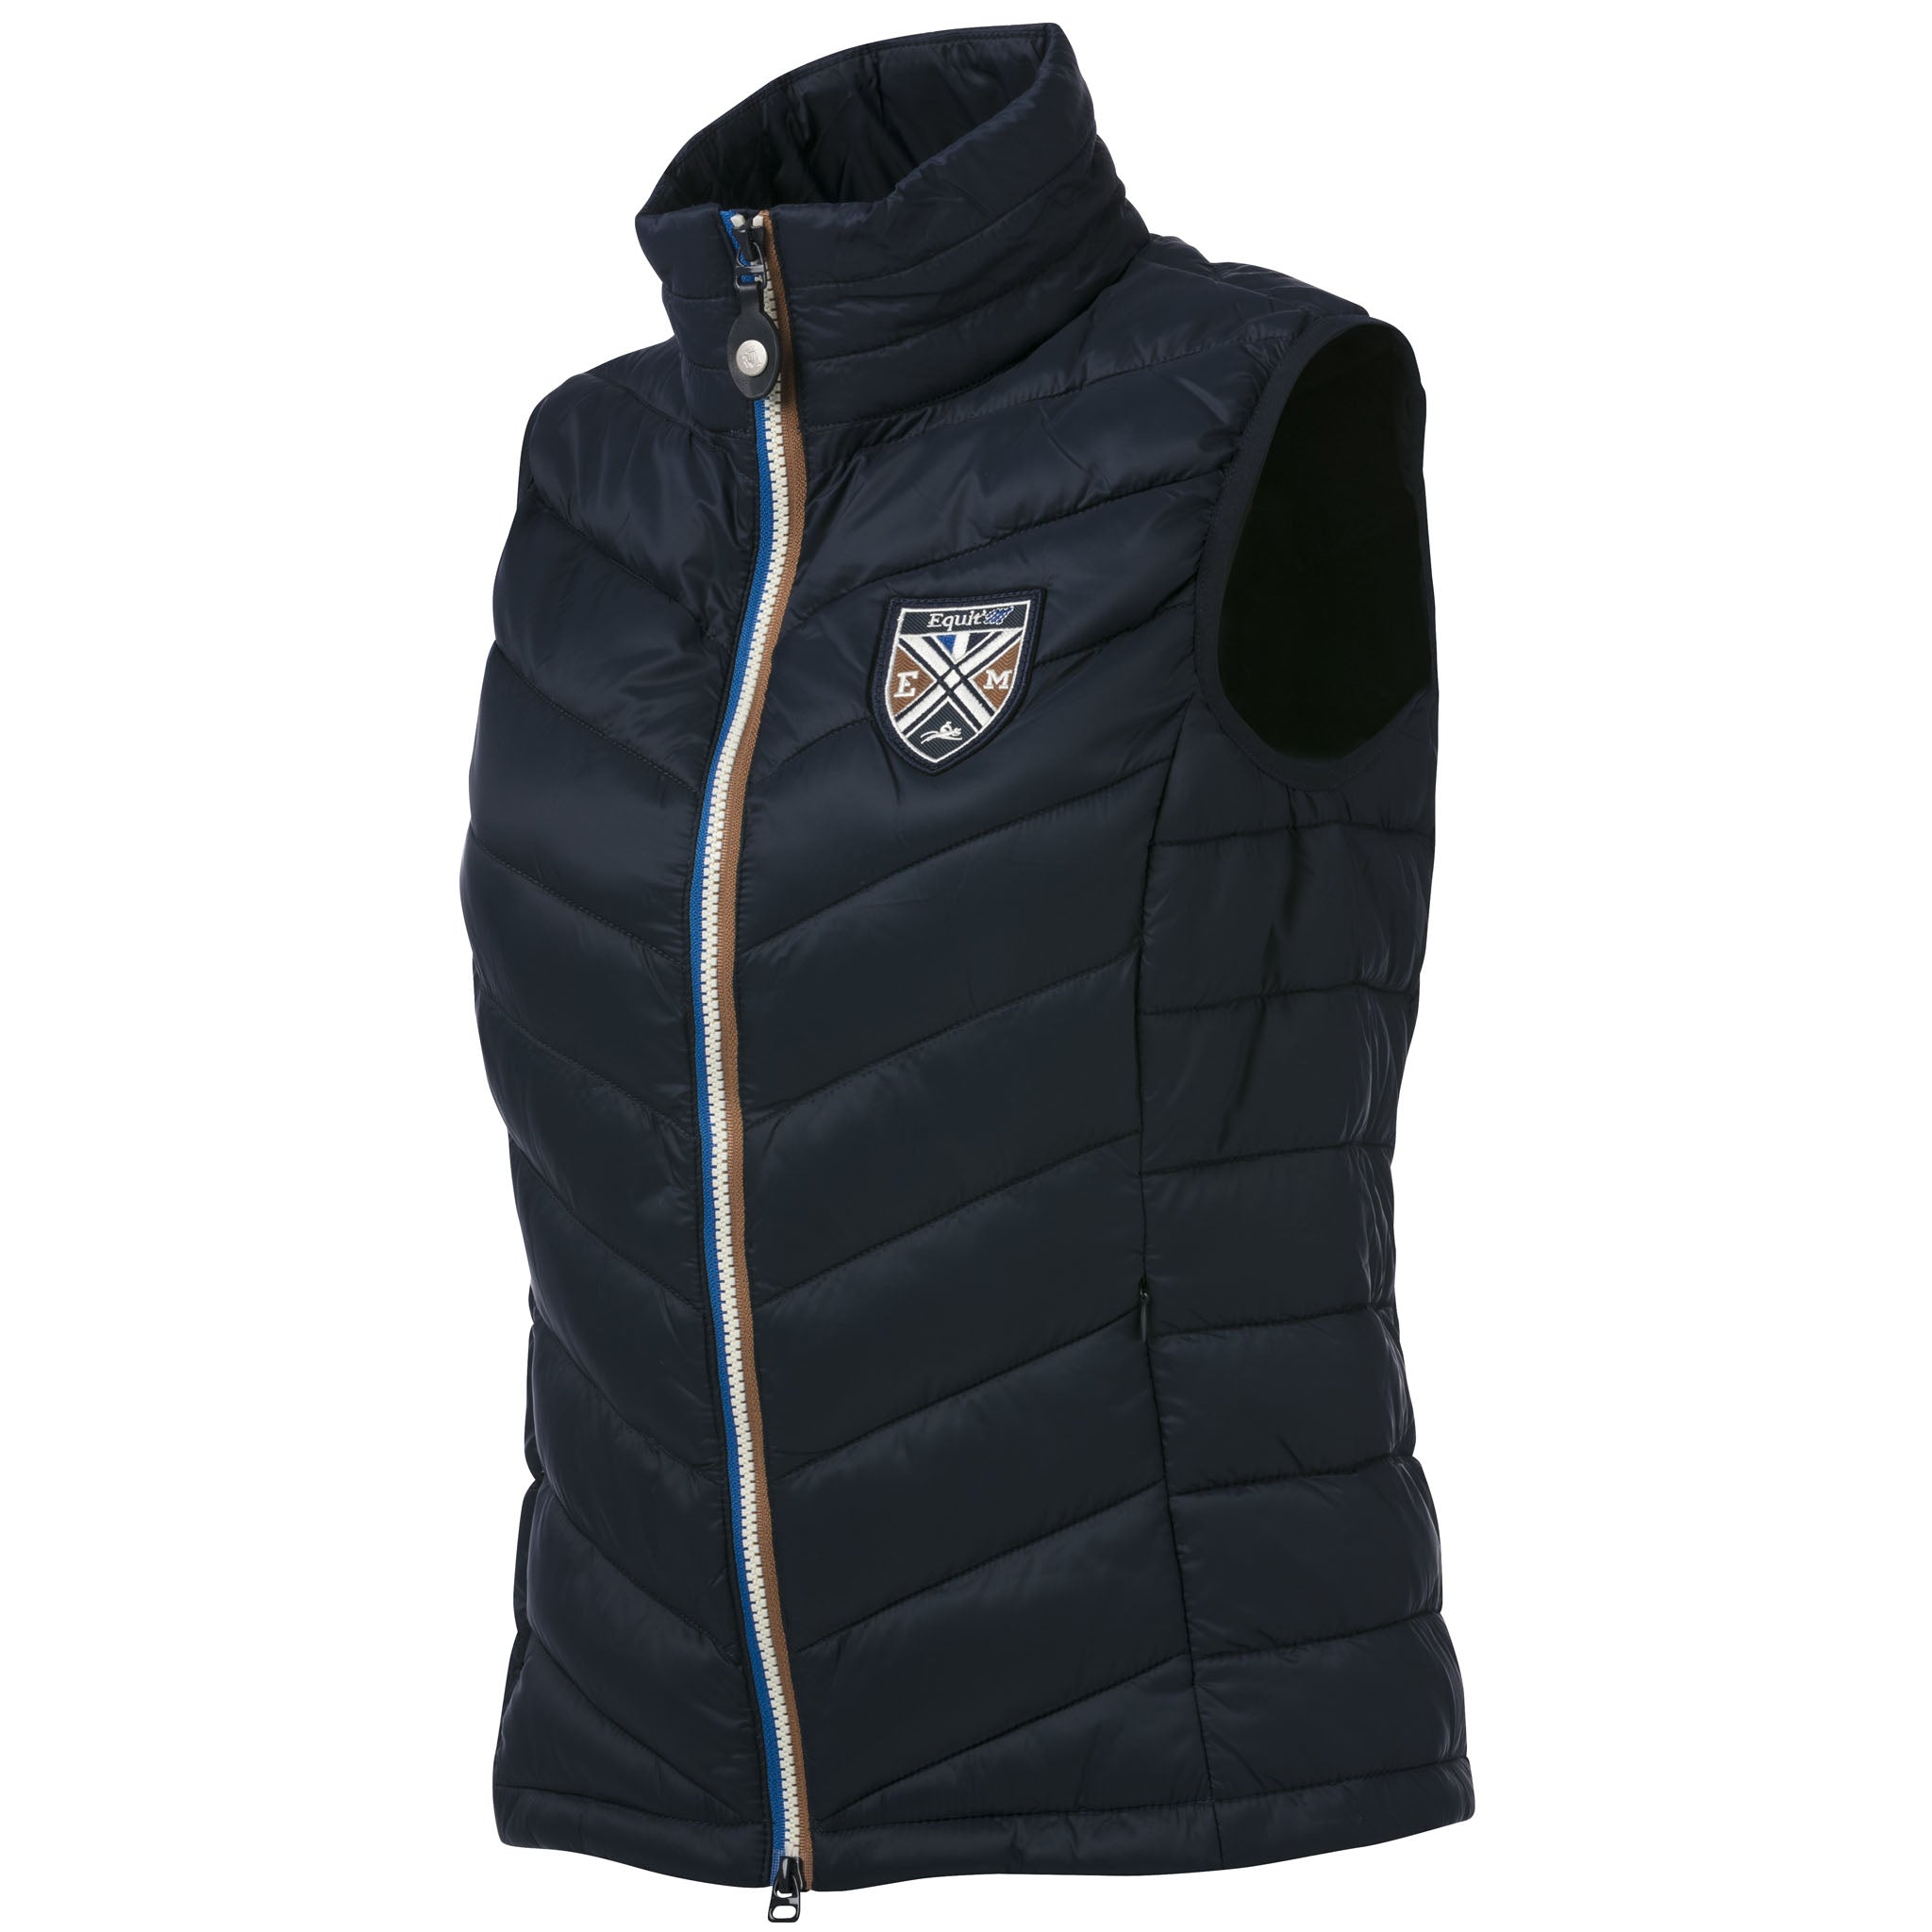 Equitheme Men's Quilted Mid-Season Gilet - Male Equestrian